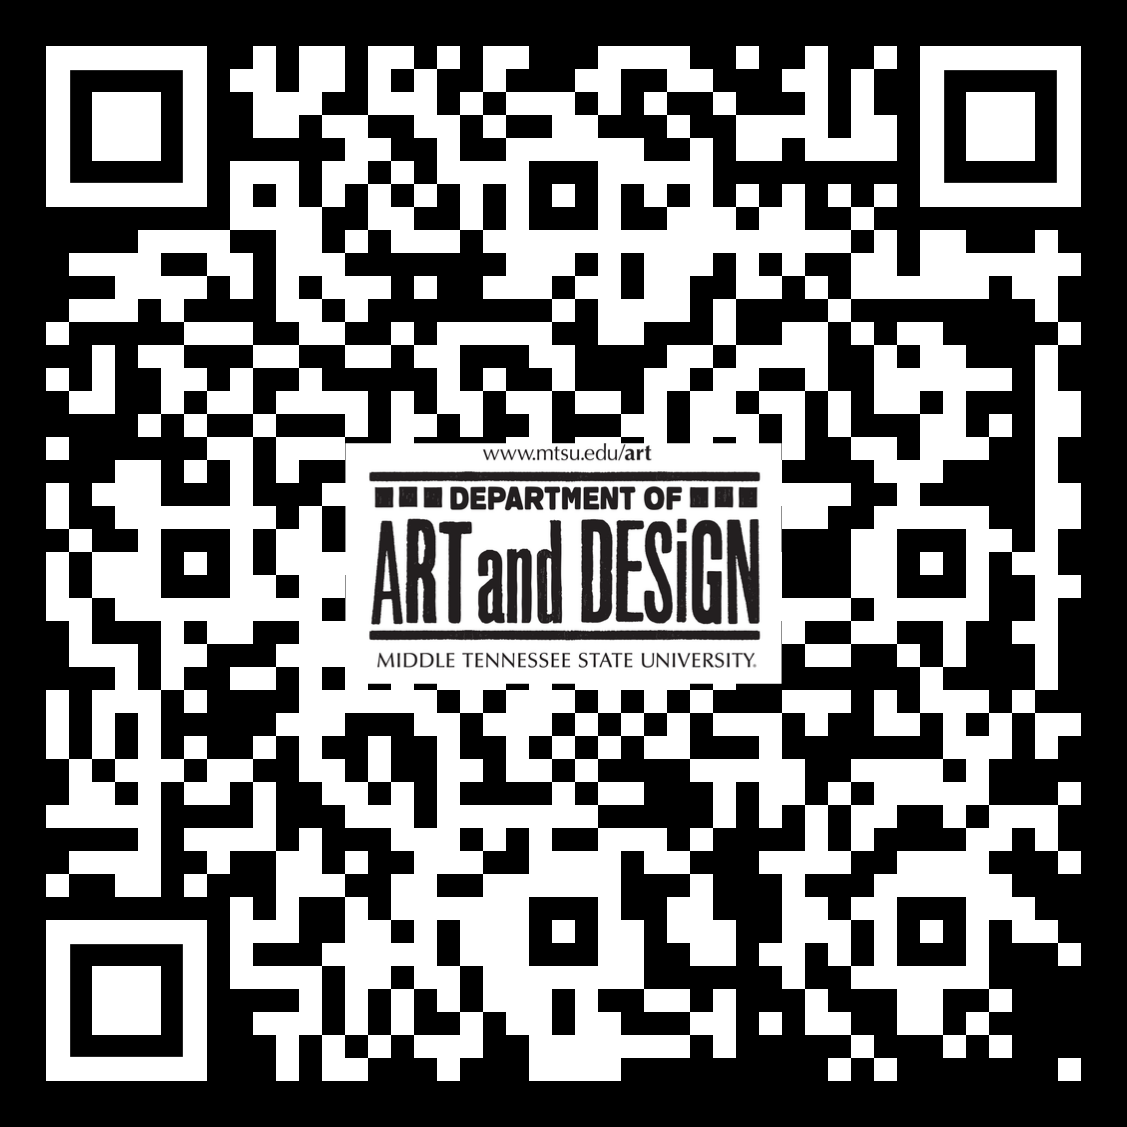 Select Link above or Scan QR Code to Reserve your Space